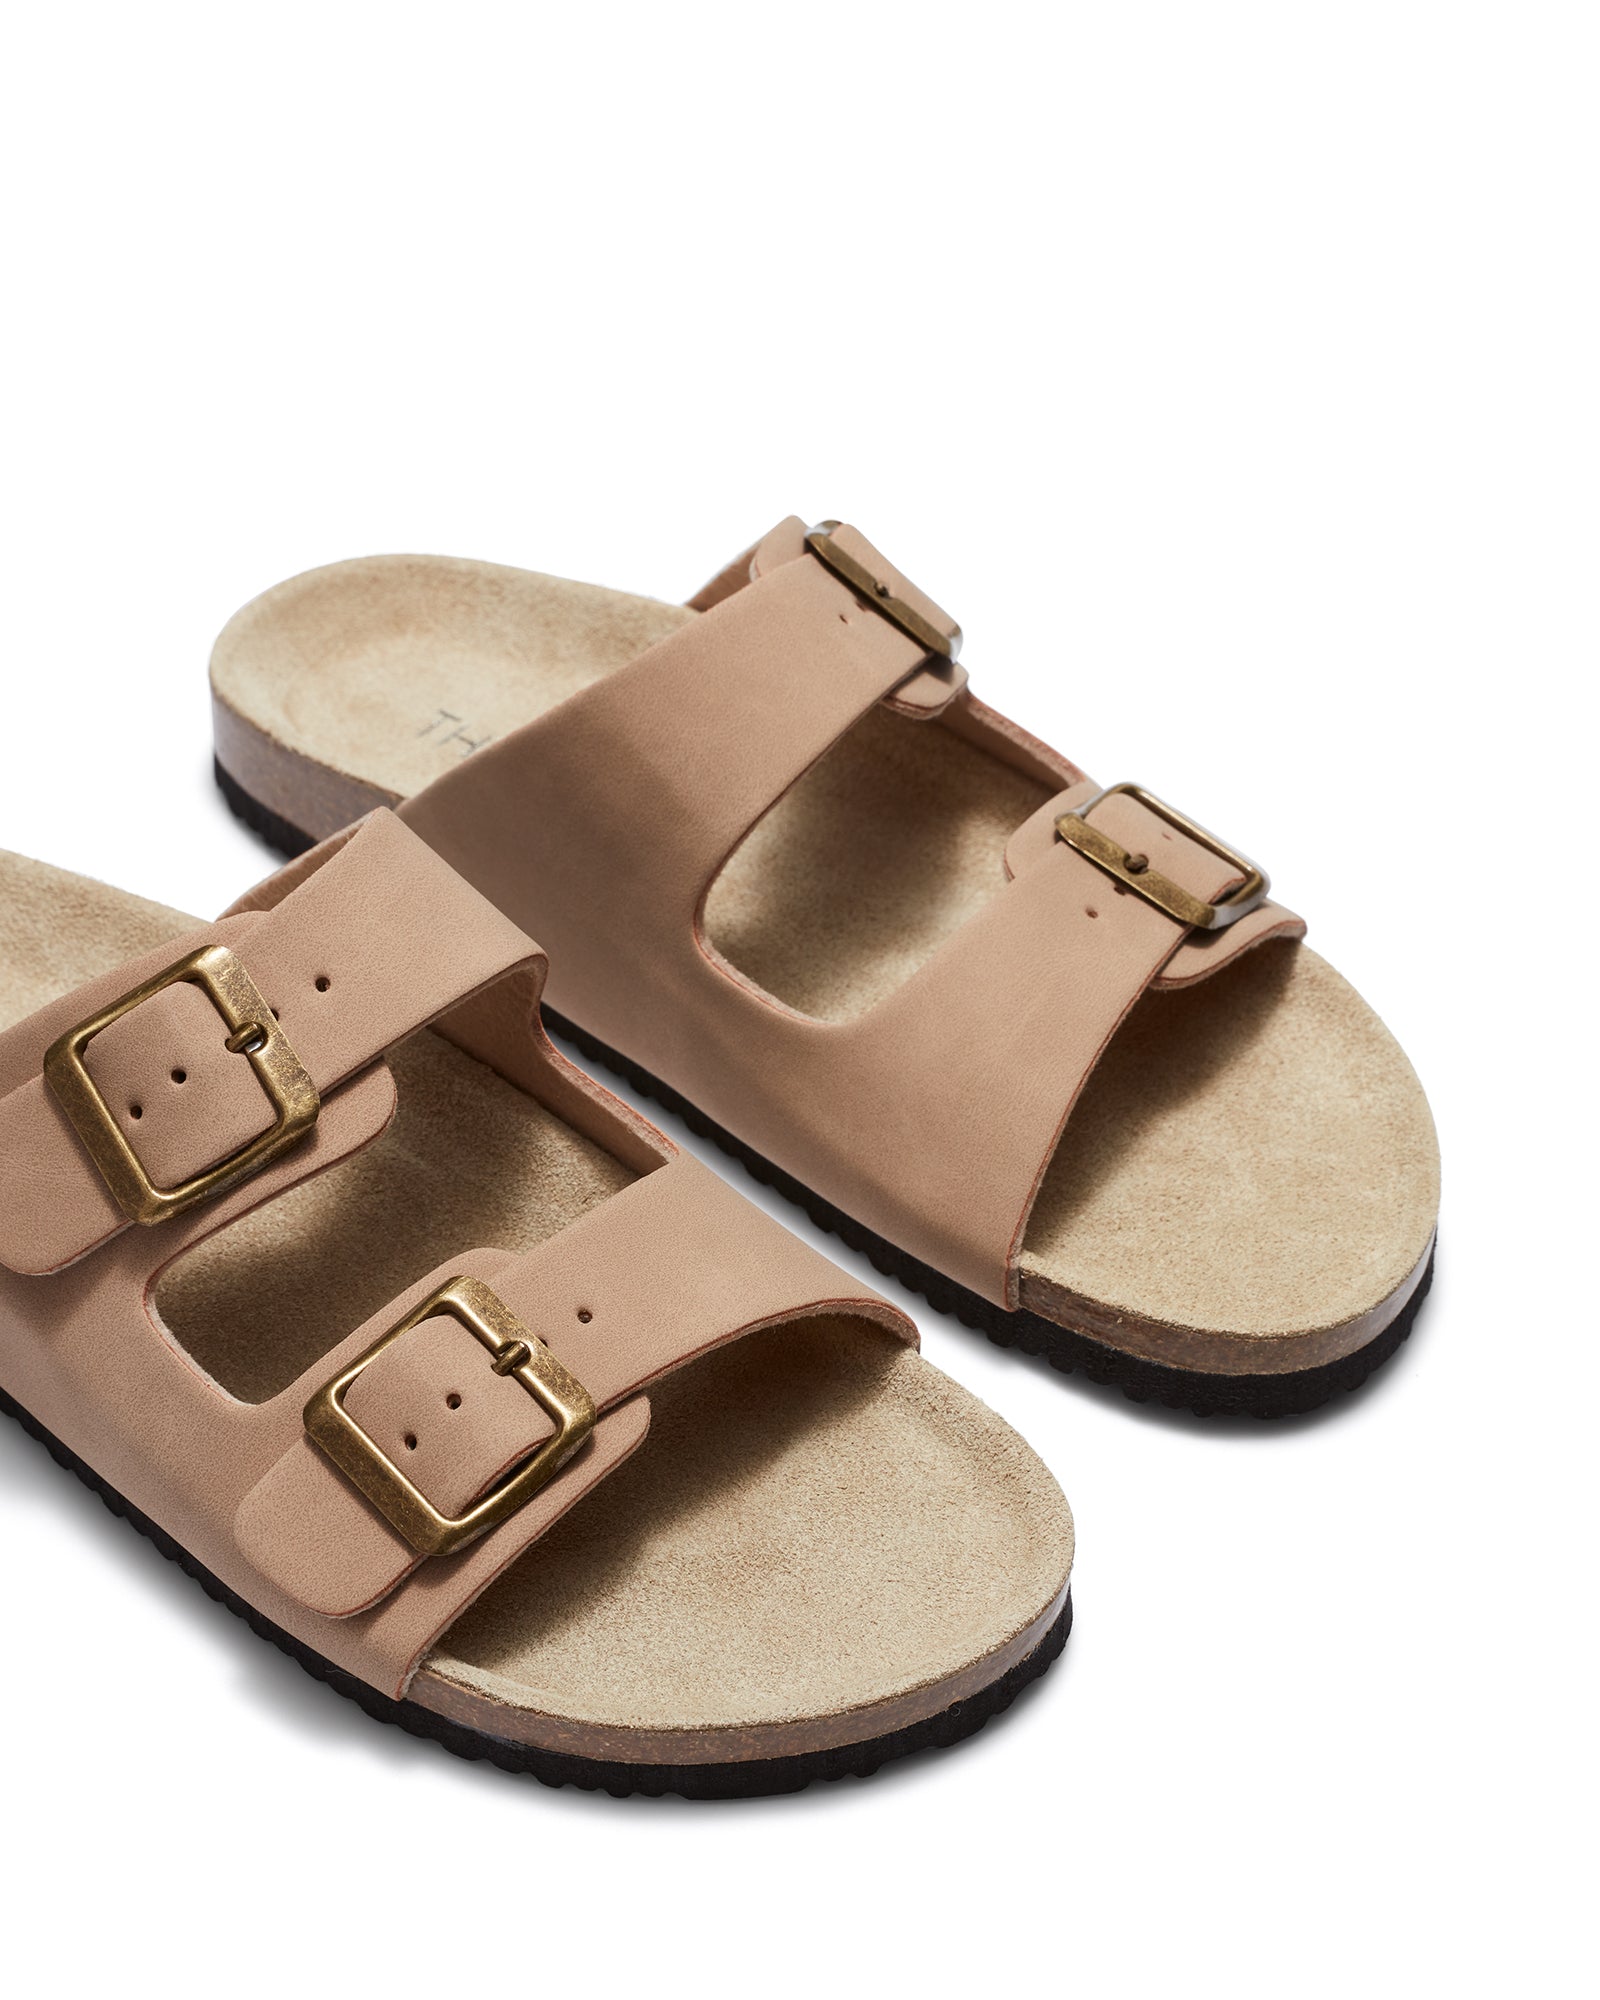 Therapy Shoes Stiva Taupe | Women's Slides | Sandals | Flats 